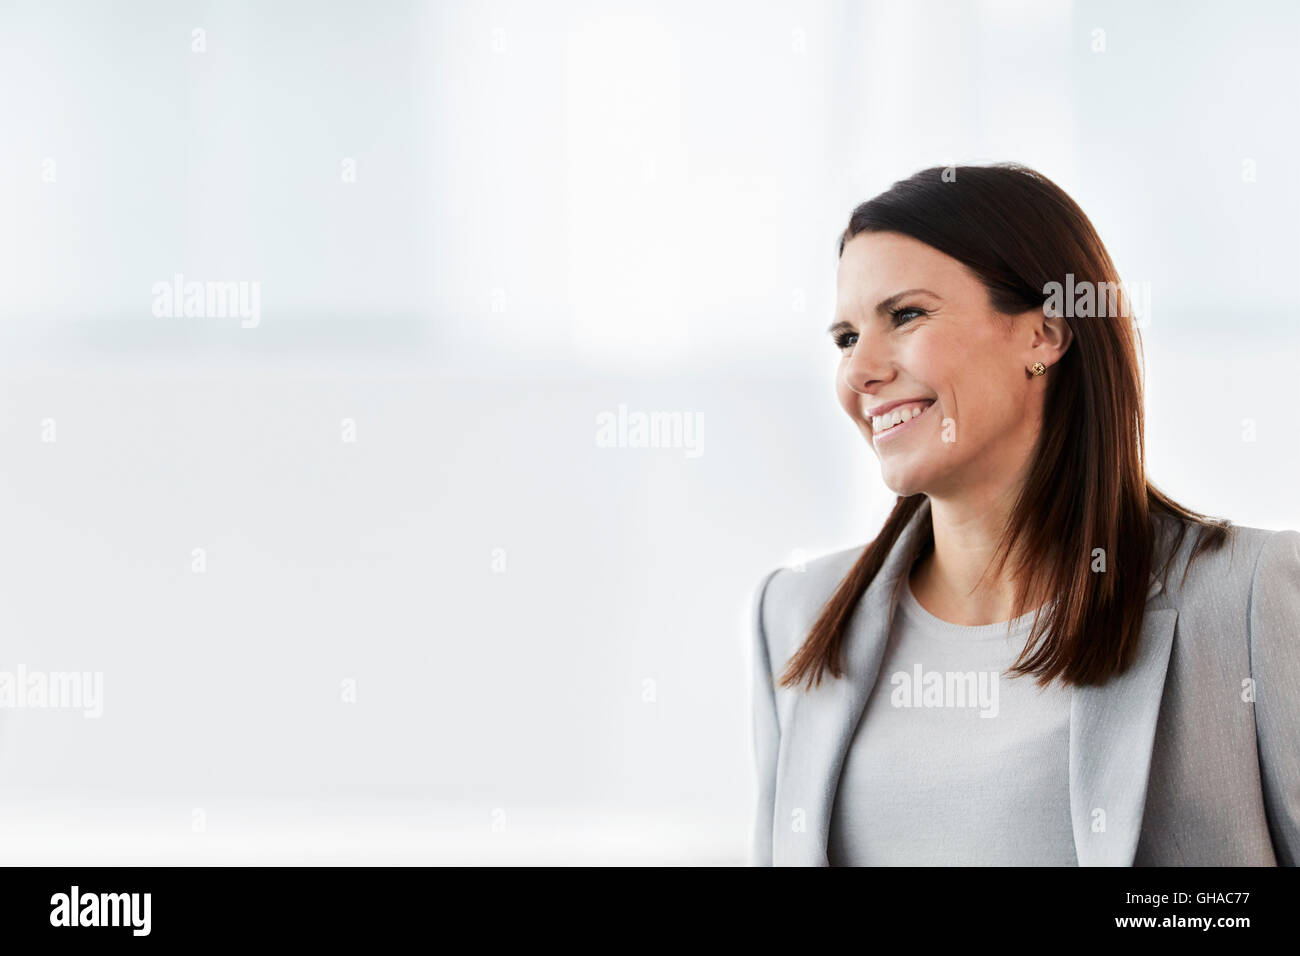 Smiling businesswoman looking away Stock Photo